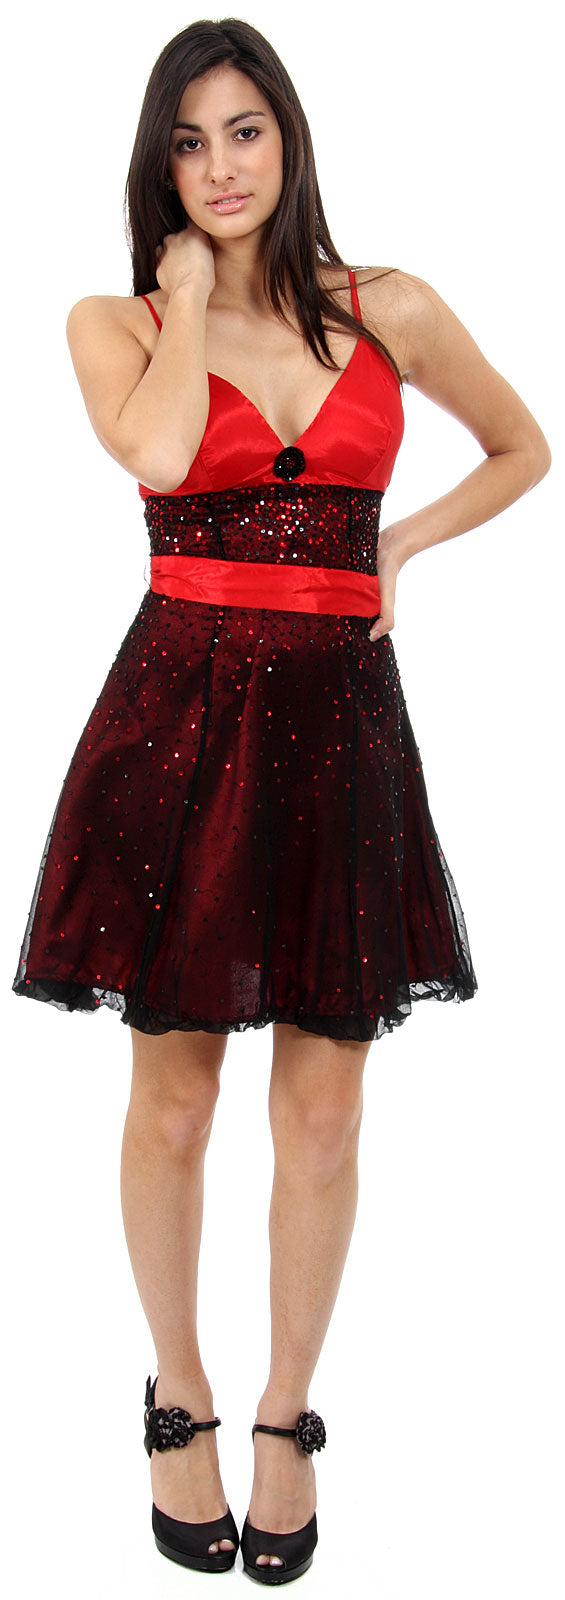 Main image of Short Sequined Party Dress With Removable Sash